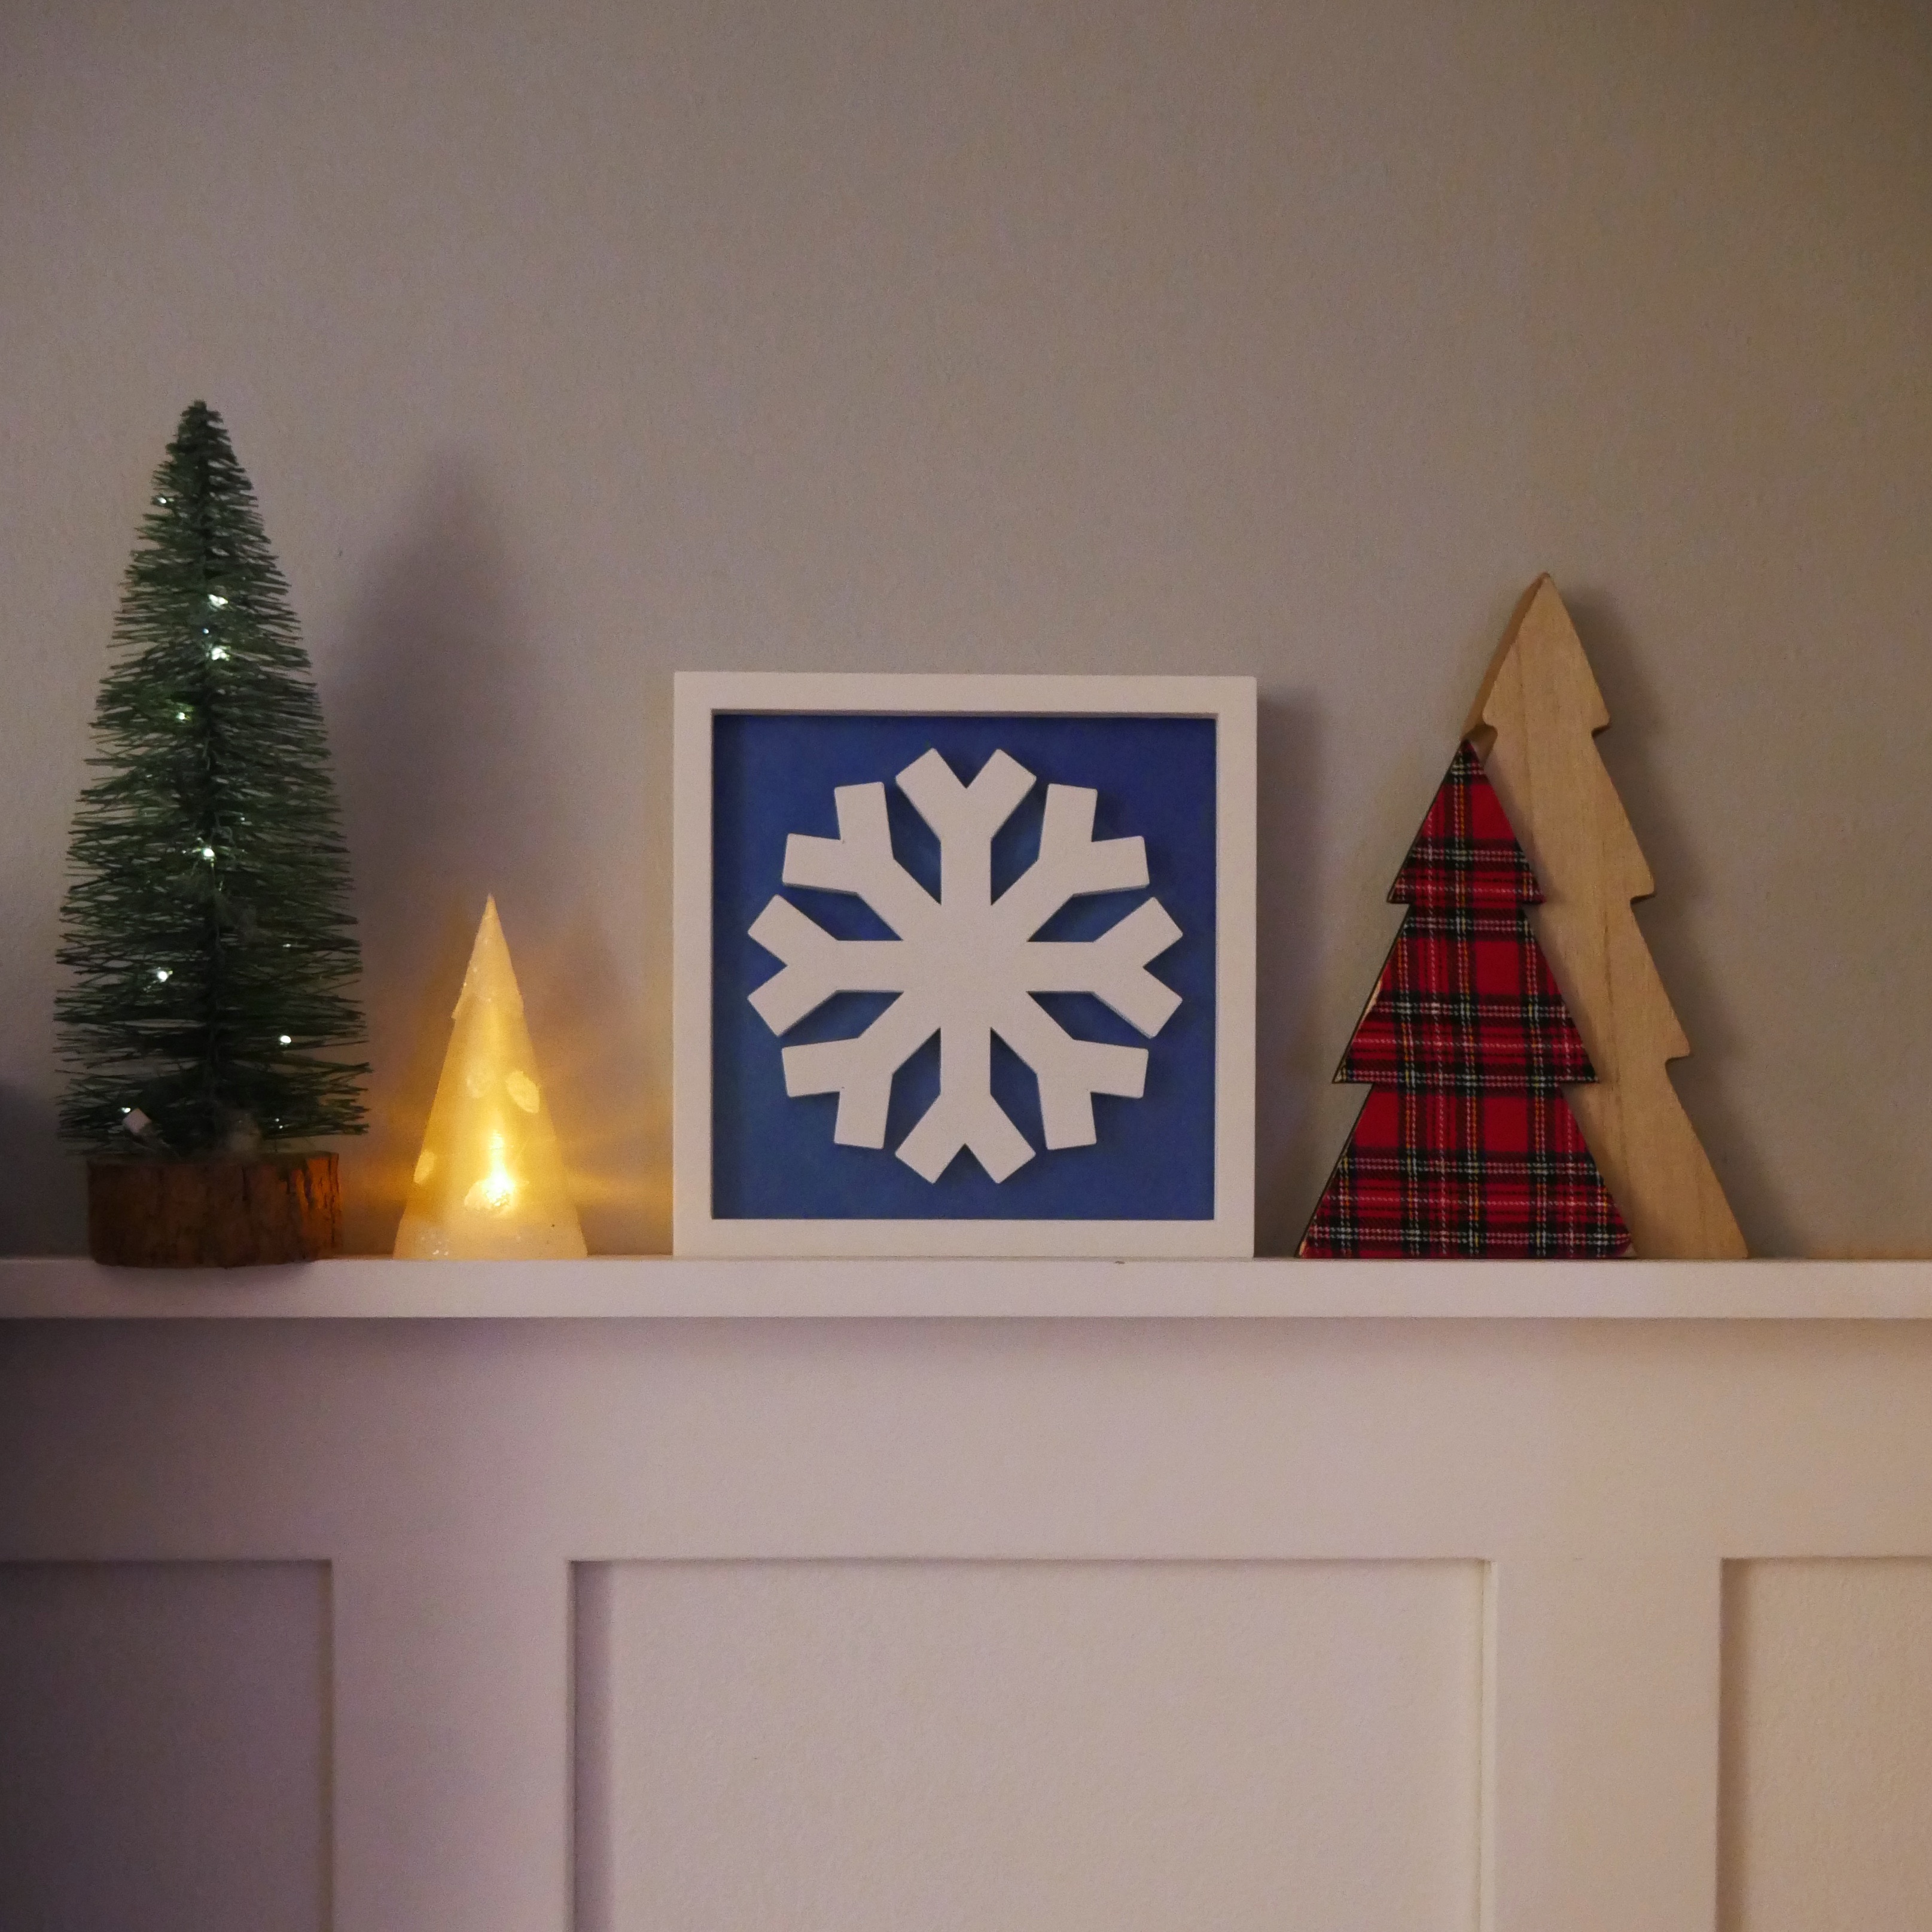 Snowflake in a frame decoration